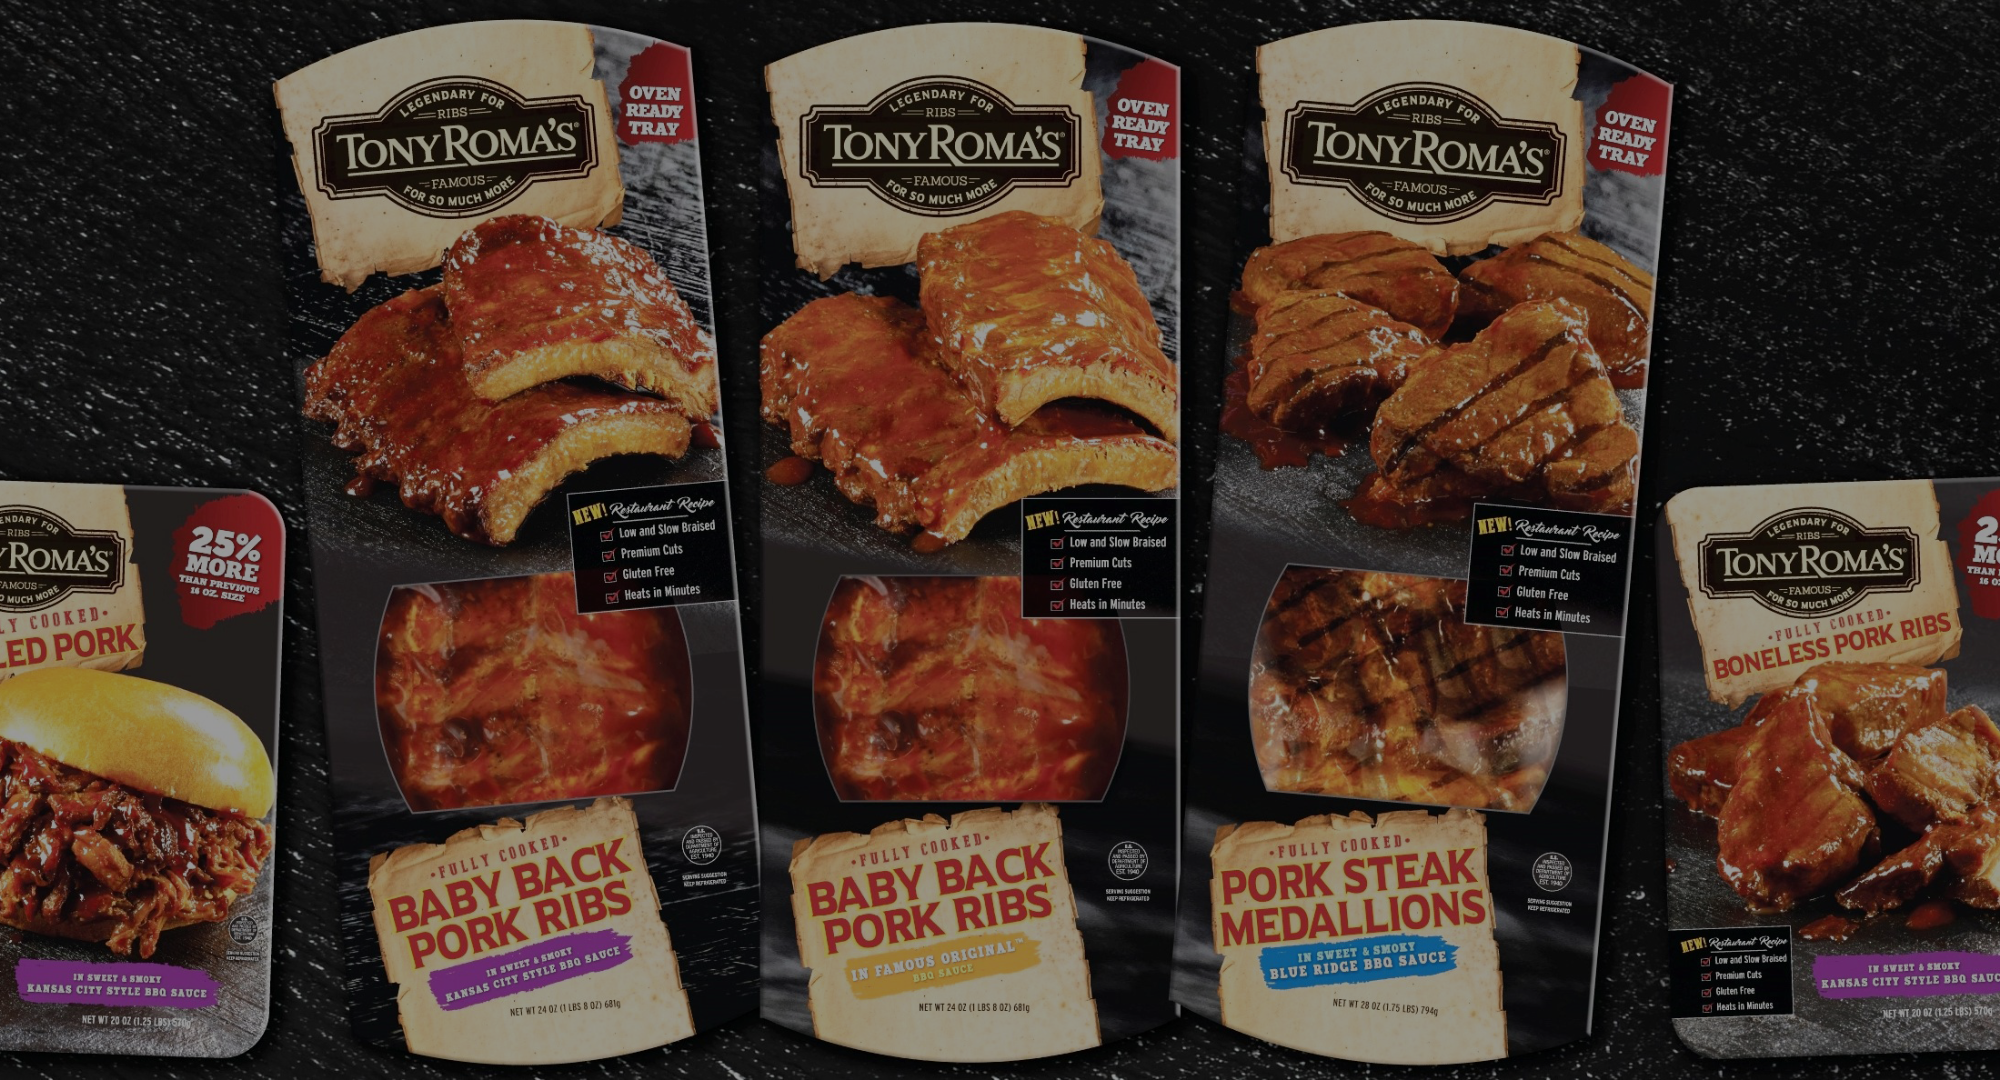 Broad Street Wins Best Food Products for Client Tony Roma’s